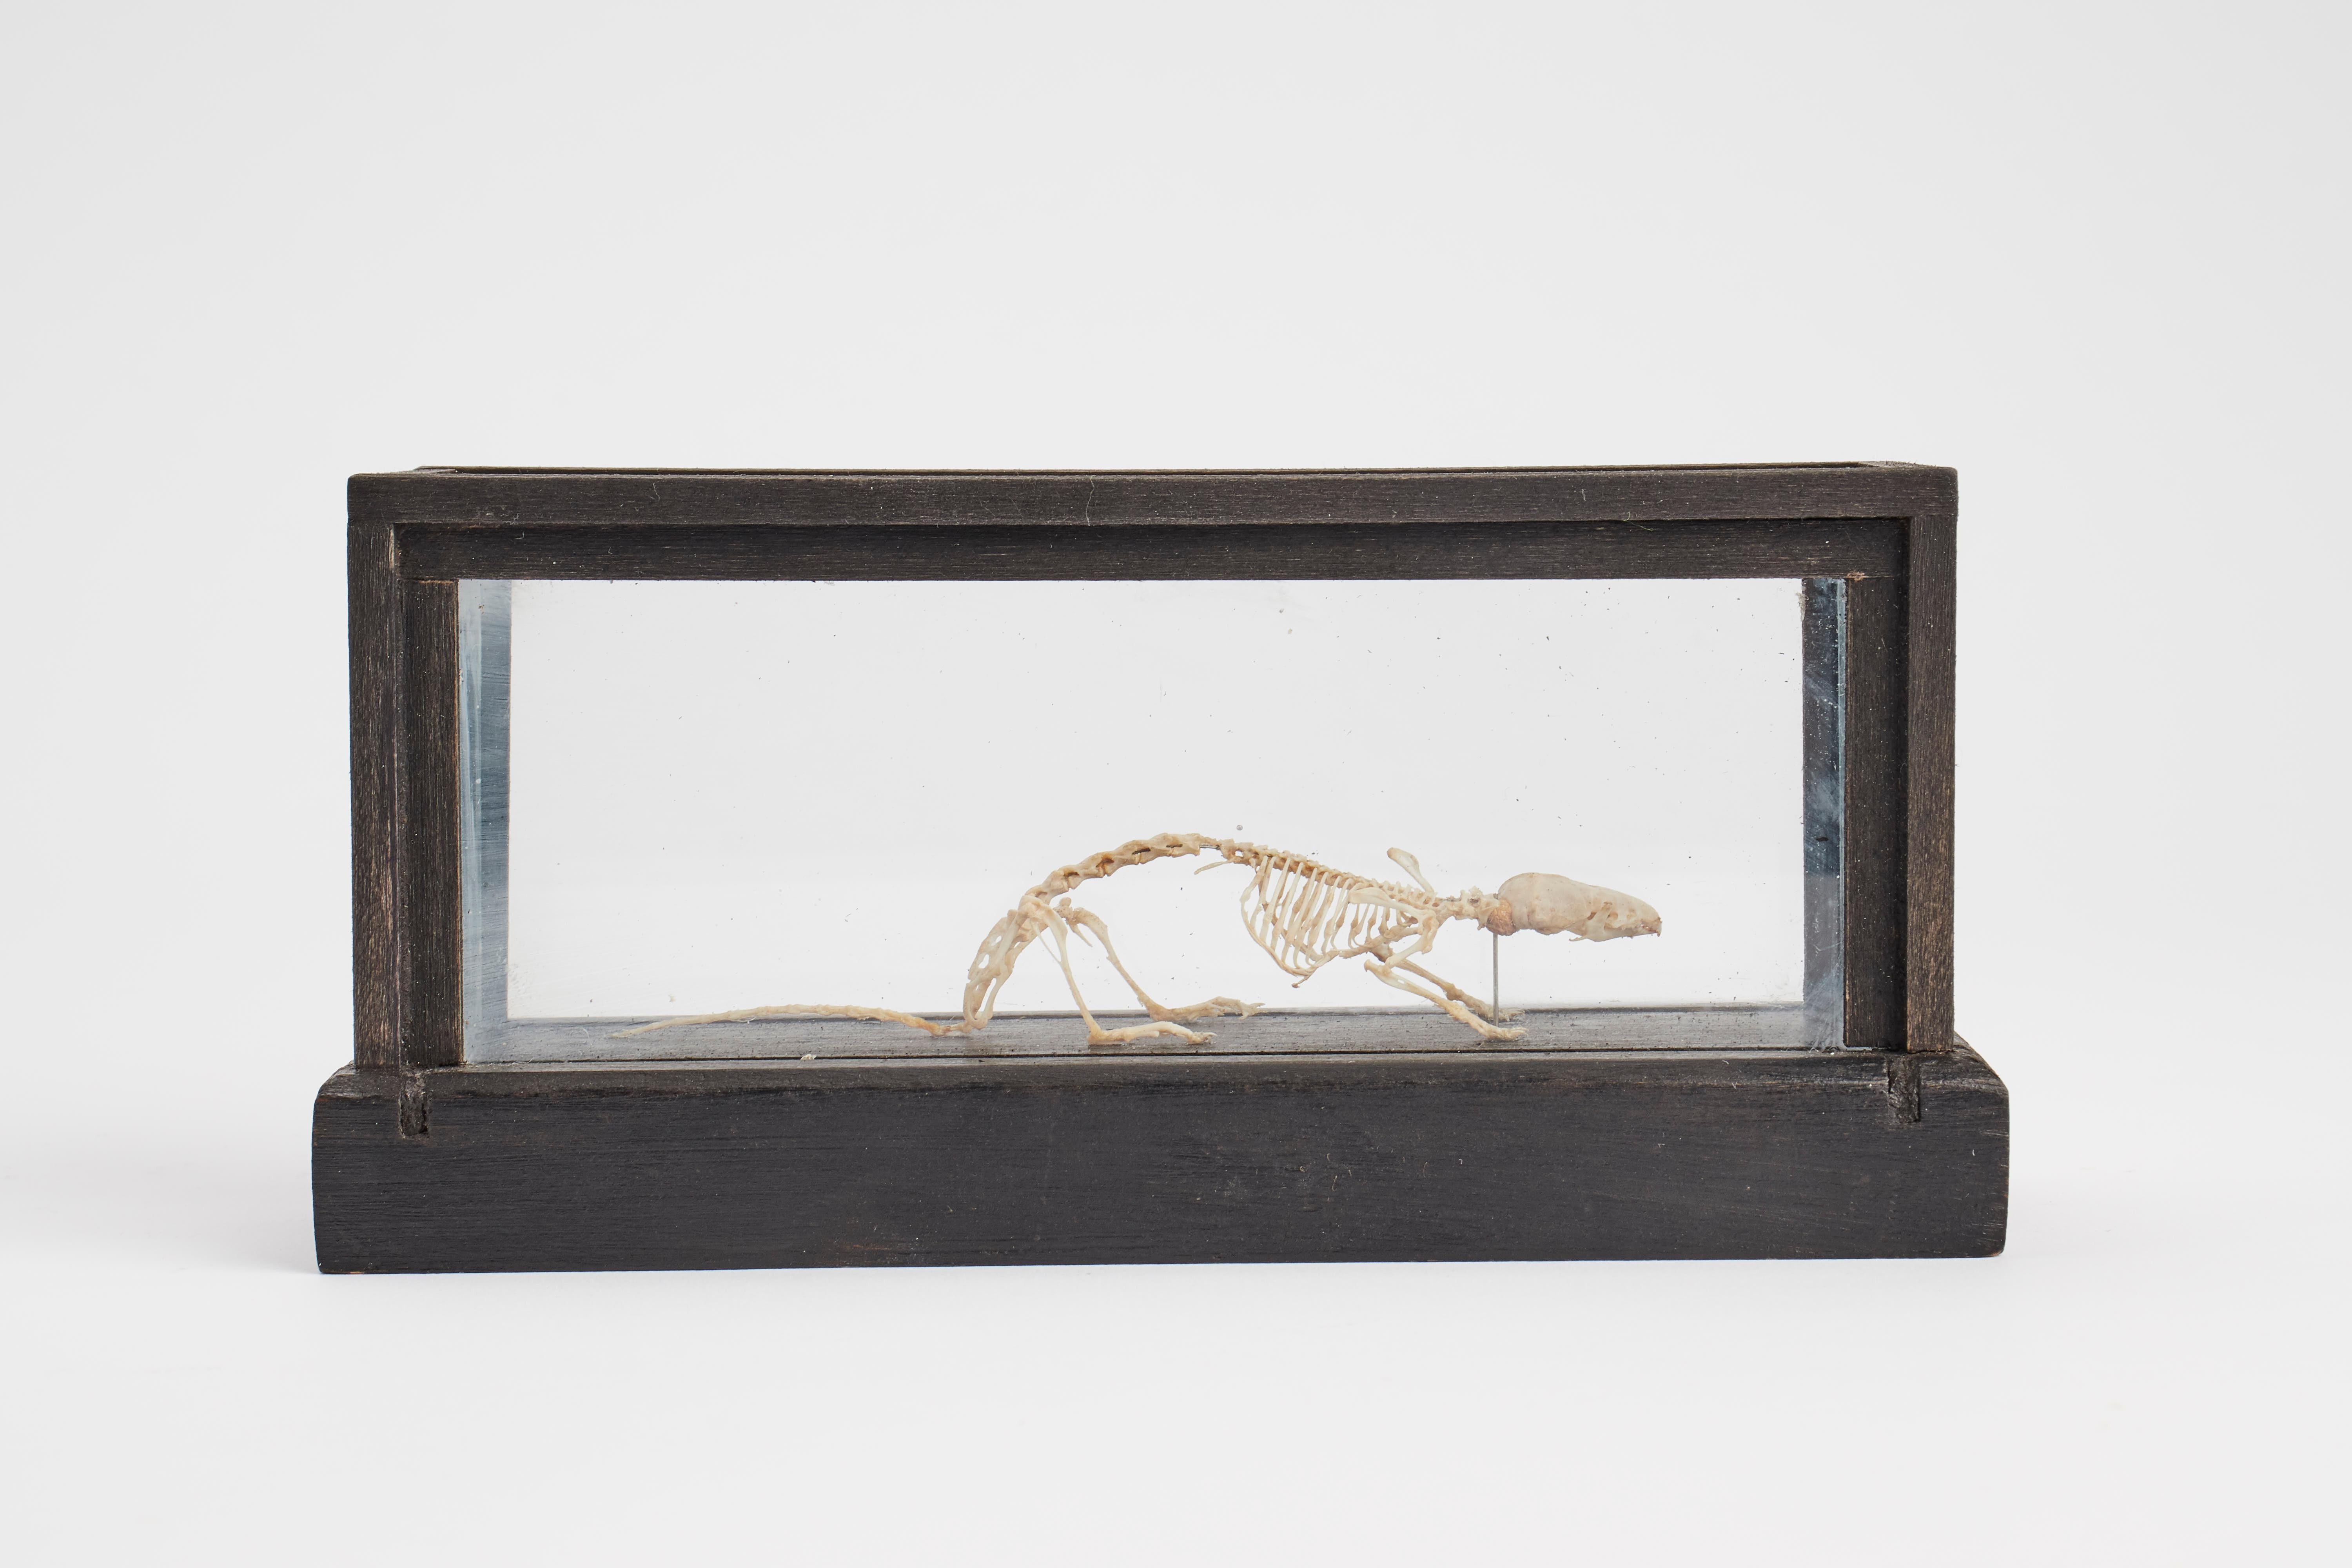 A natural specimen of a mouse Sorex Araneus Common Shrews skeleton for Wunderkammer. The specimen is mounted inside a wooden and glass case on an oak wooden base. London, circa 1890.